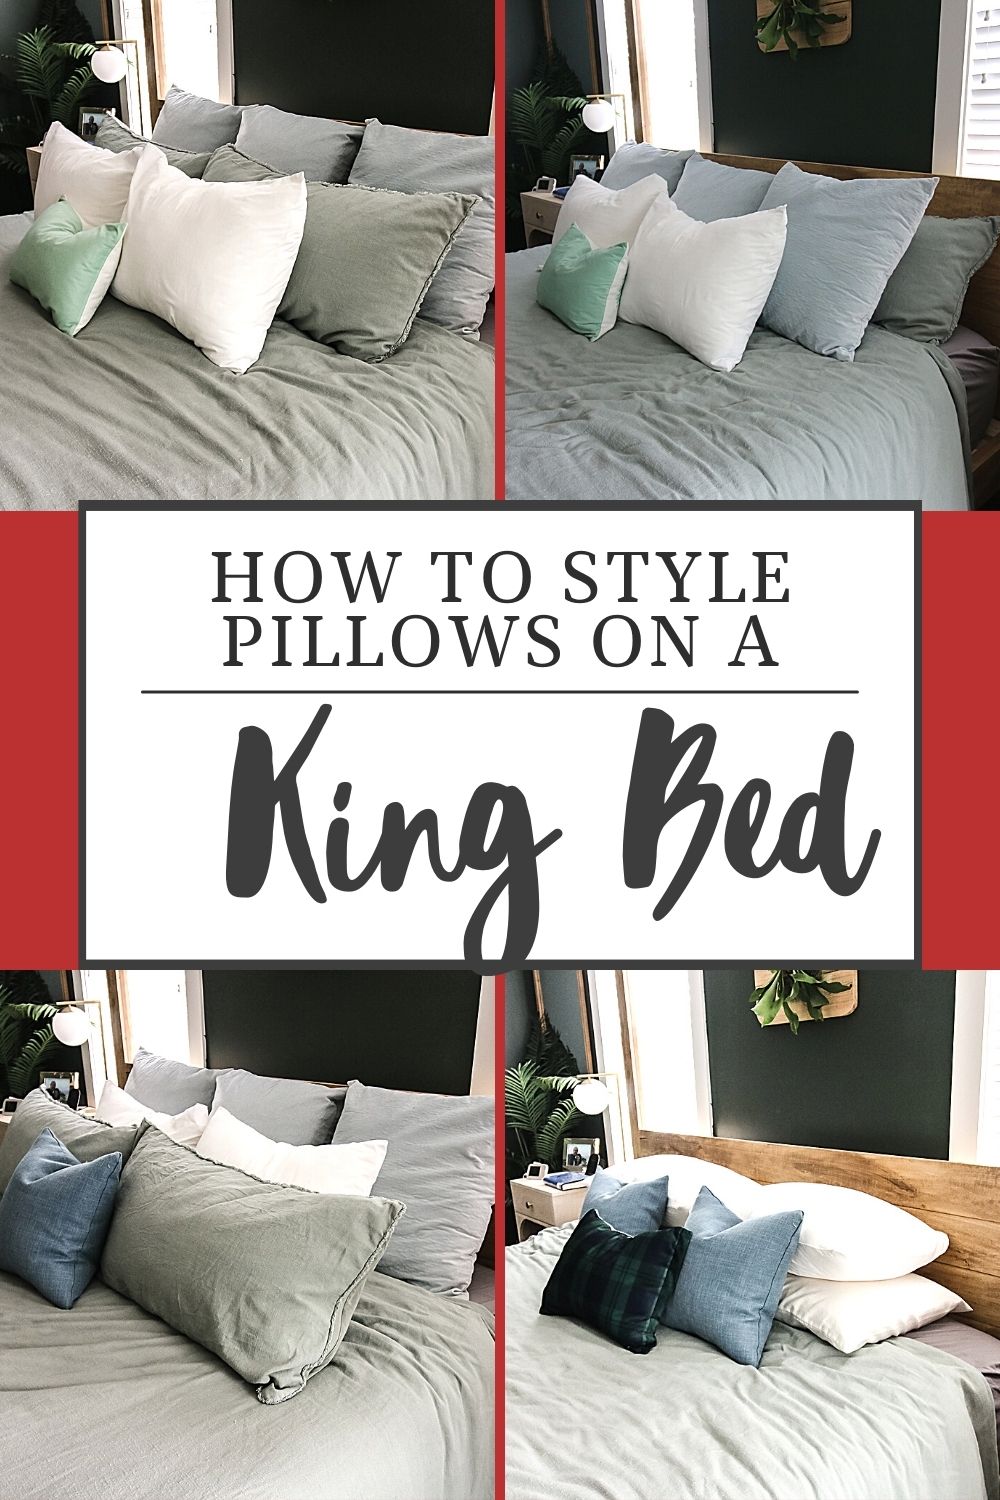 20 Incredibly Decorative King Sized Bed Pillow Arrangements